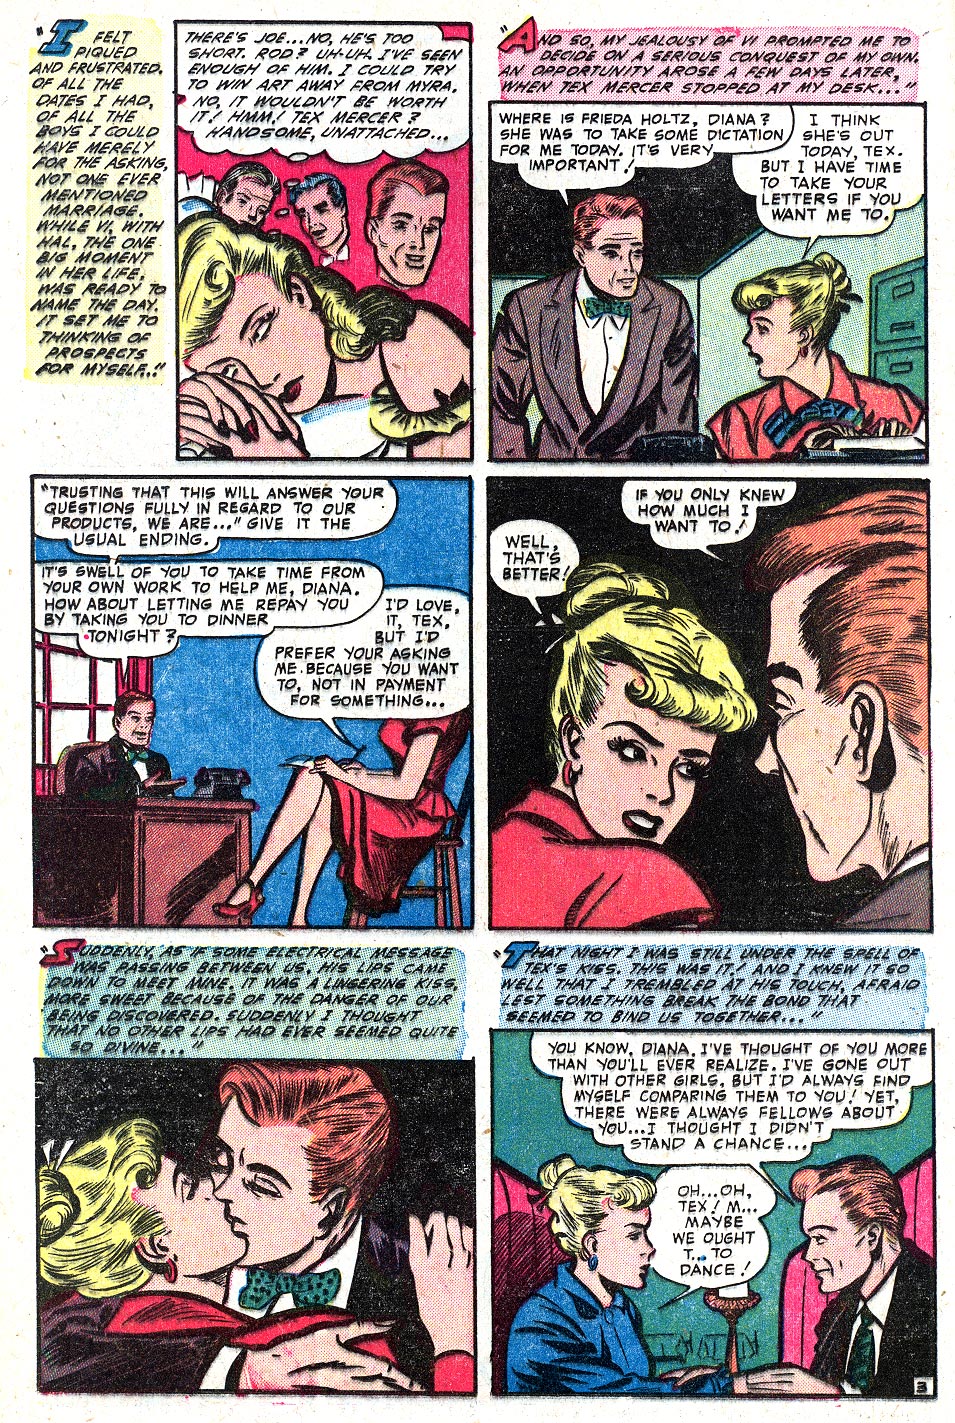 Romantic Love (1958) issue 3 - Page 12